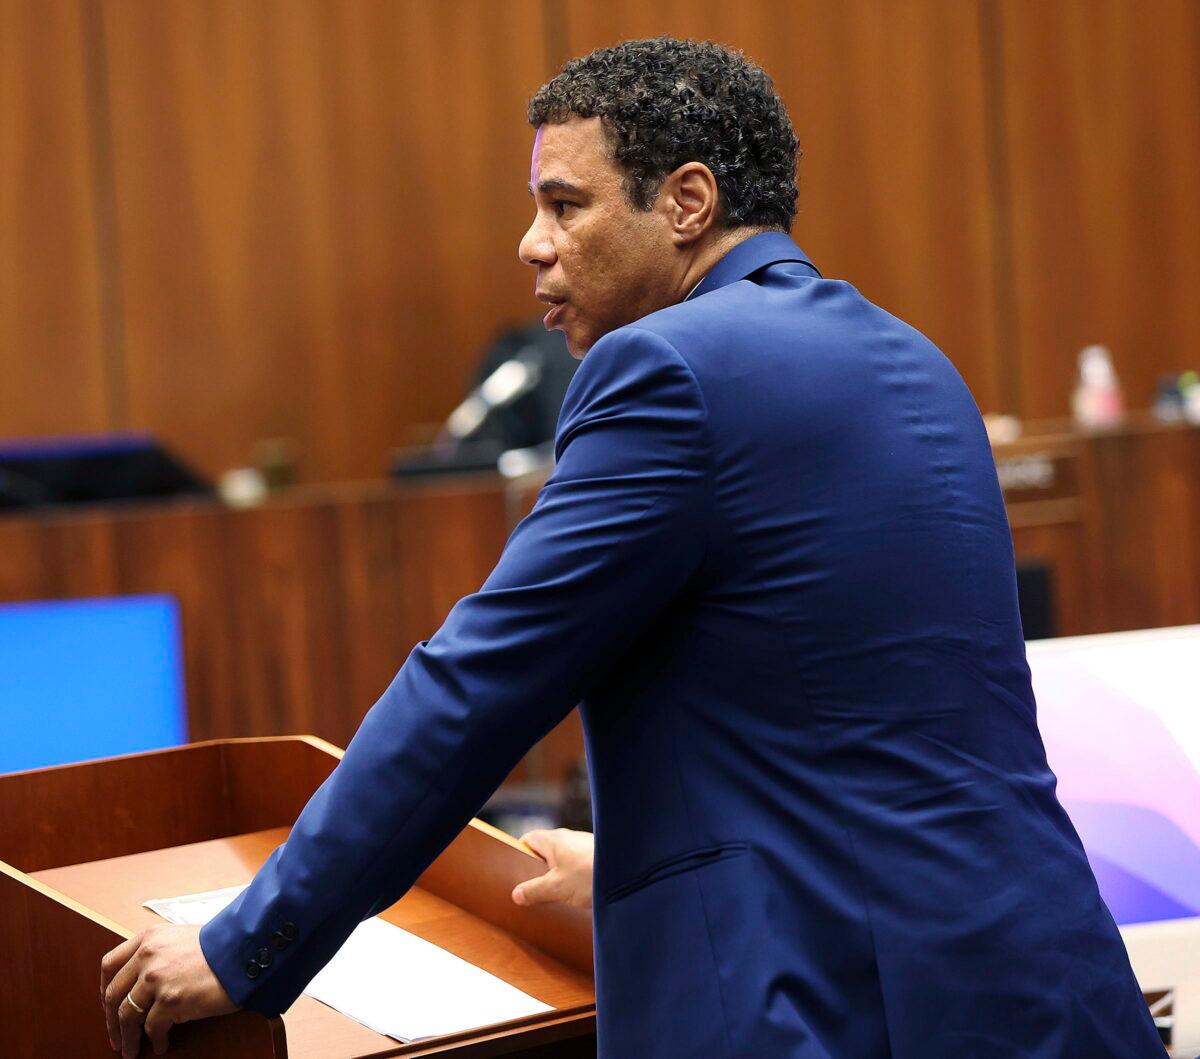 Defense attorney Aaron Jenson speaks during opening statement during Eric Holder murder trial at Los Angeles Superior Court in Los Angeles on June 15, 2022. (Frederick M. Brown/Daily Mail.com via AP, Pool)